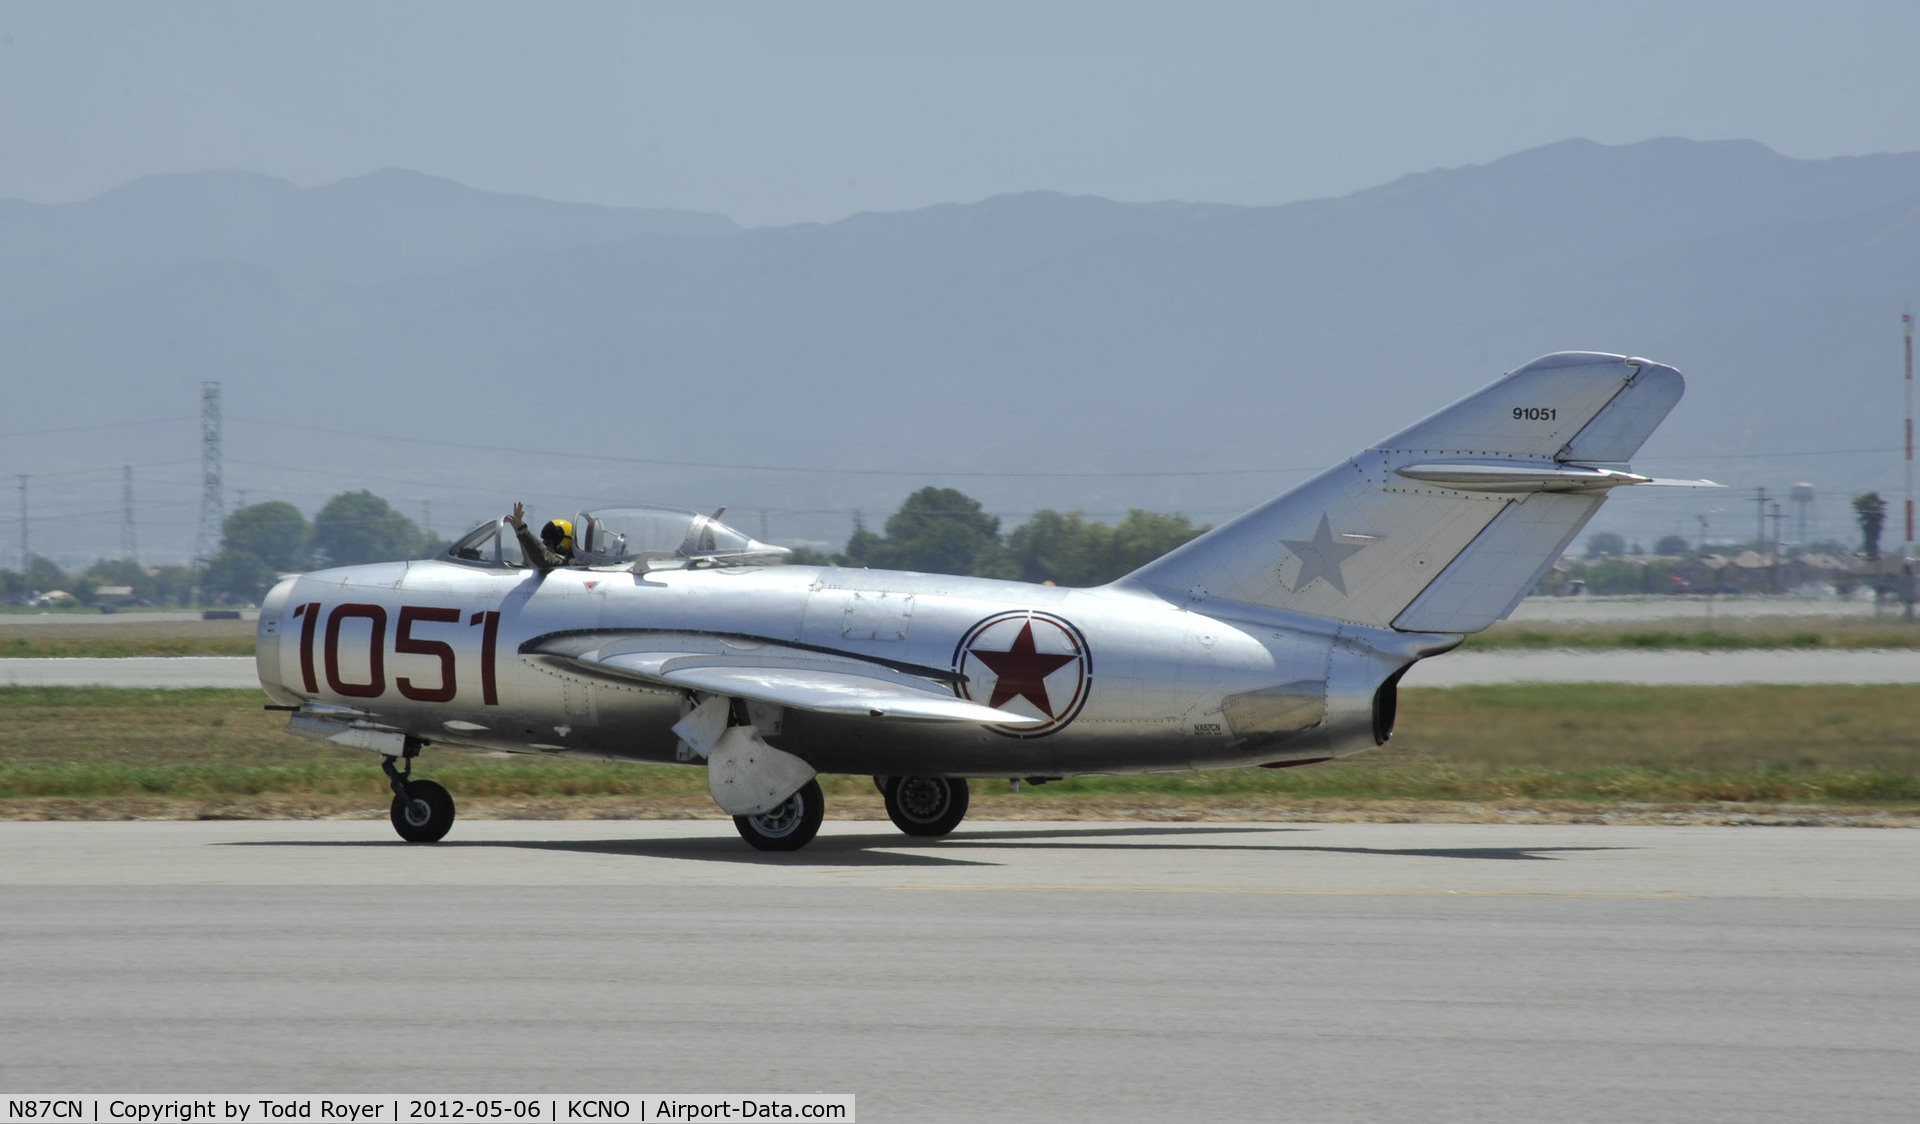 N87CN, Mikoyan-Gurevich MiG-15 C/N 910-51, Taxiing to parking after flying display